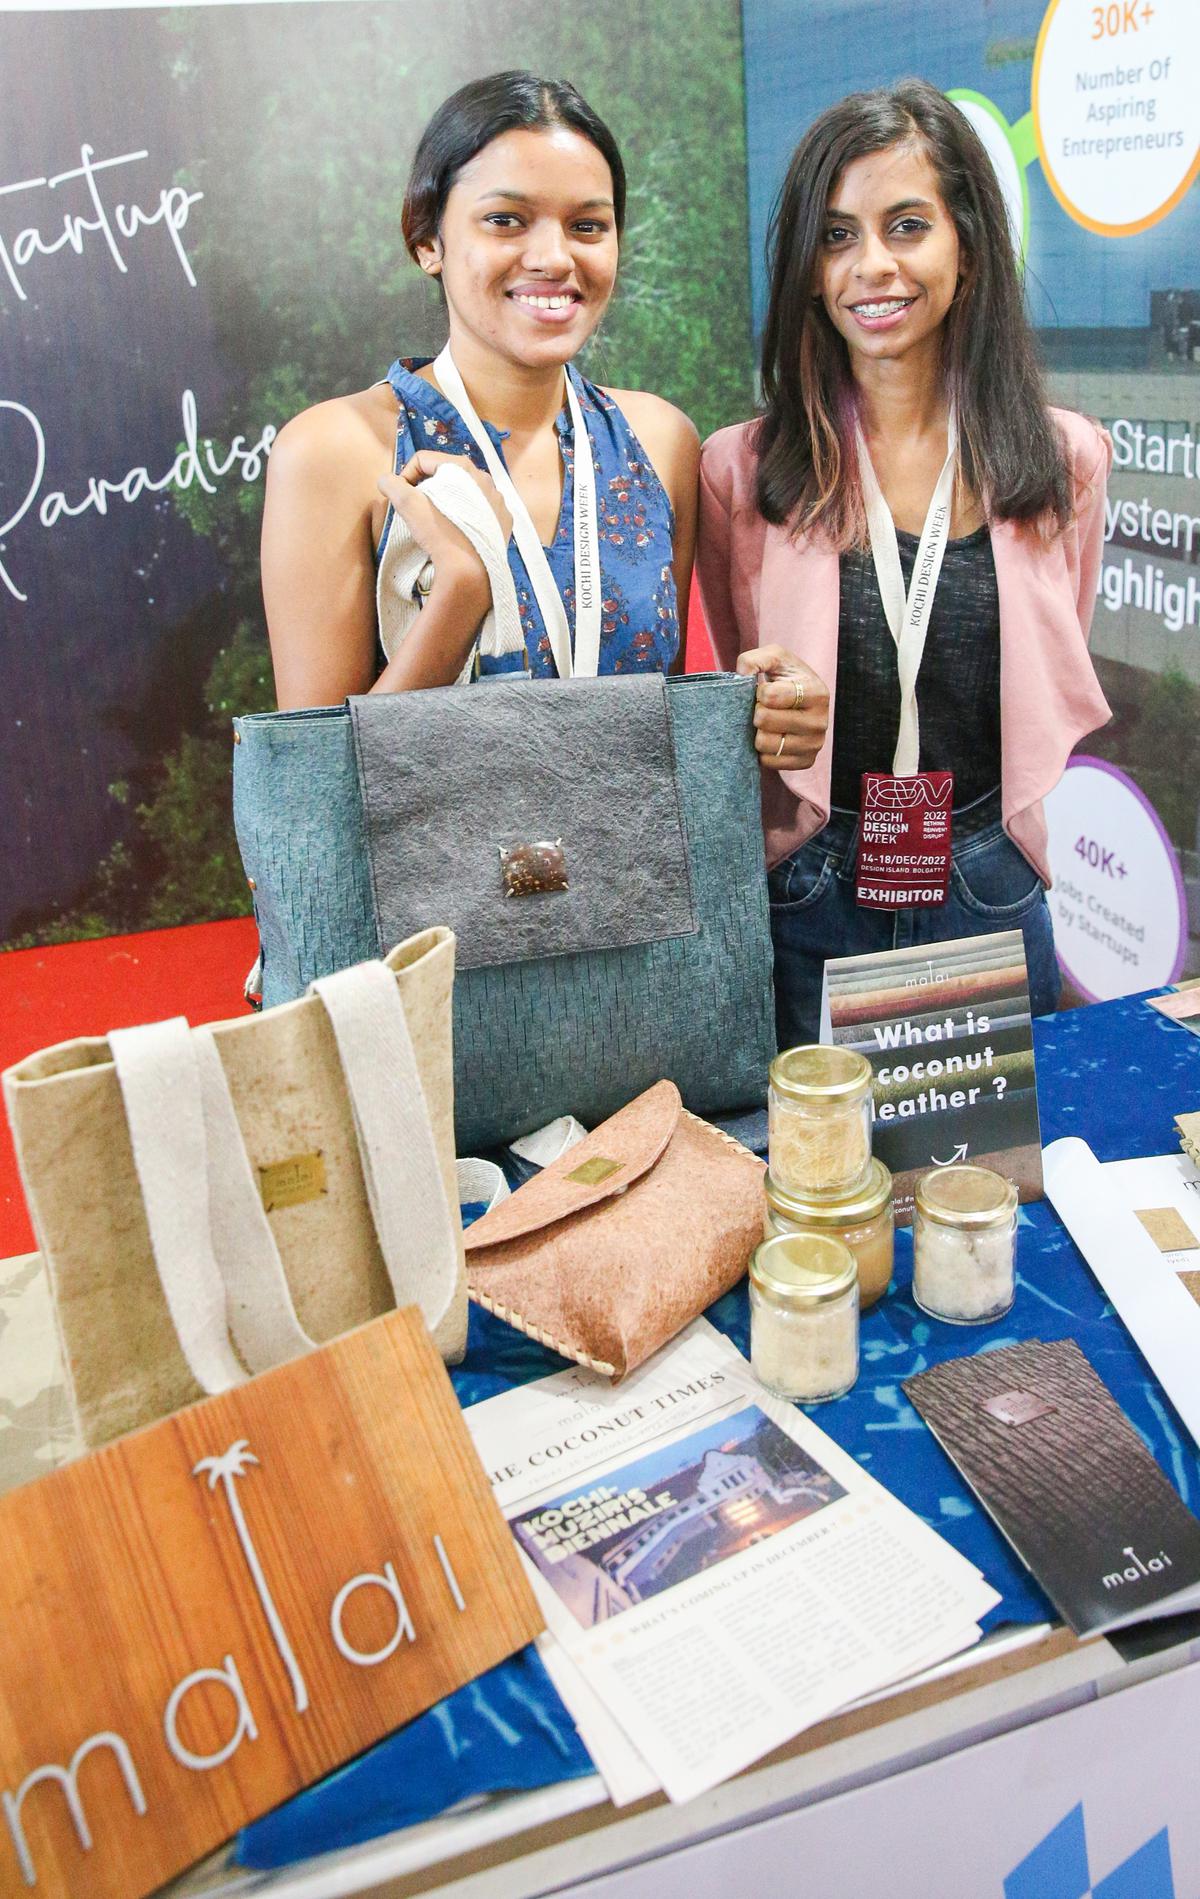 Veronica Sheryl, Senior Consultant at Malai Bio Materials Design Private Limited and Candida Fernandez, Marketing Specialist, at their booth at Kochi Design Week in Bolgatty.